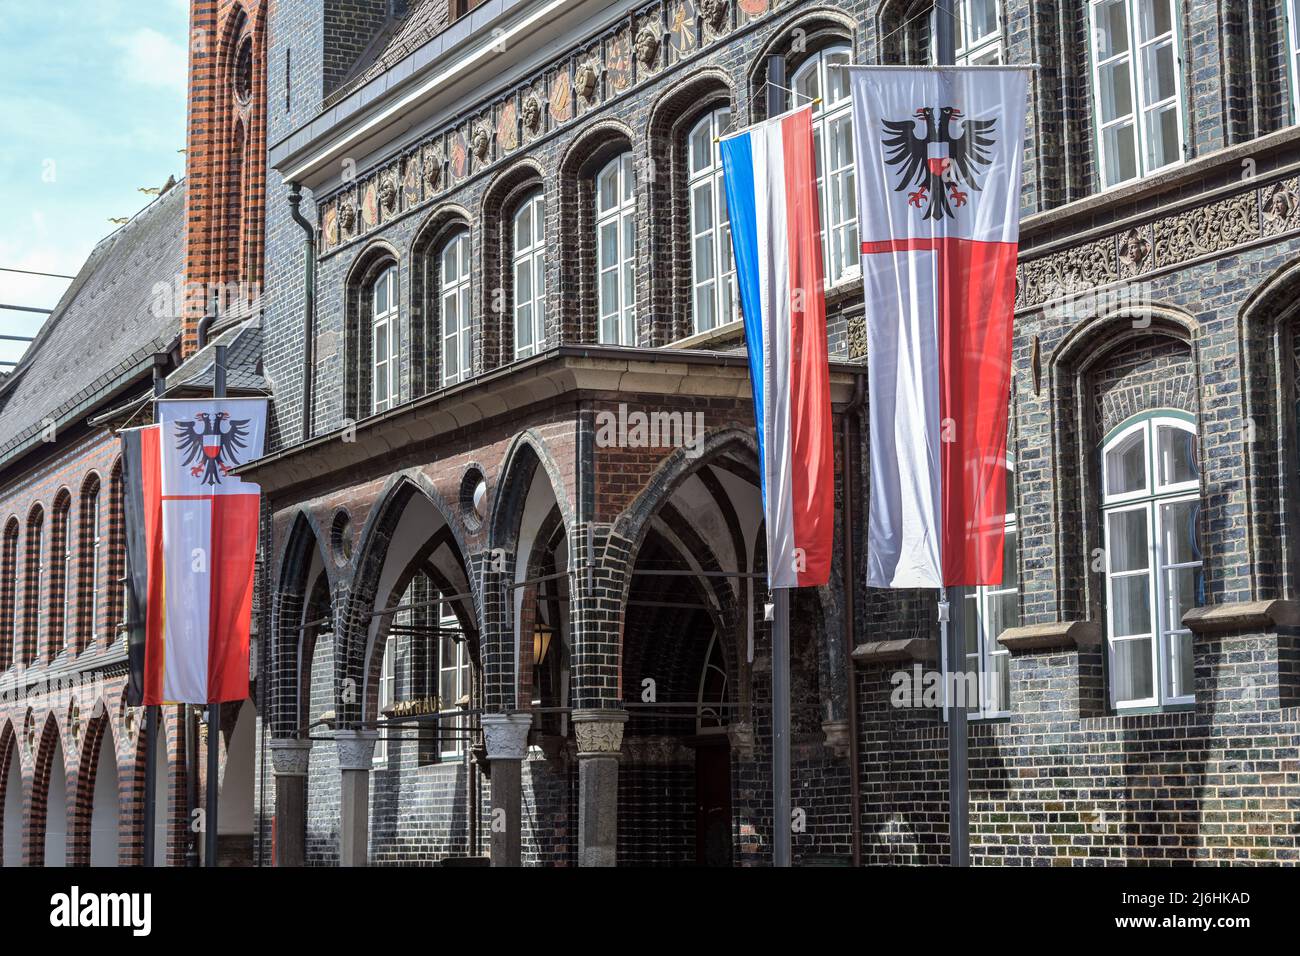 Entrance at the historical town hall of Lubeck with the flag of the hanseatic city showing a double headed eagle and the Schleswig-Holstein flag with Stock Photo